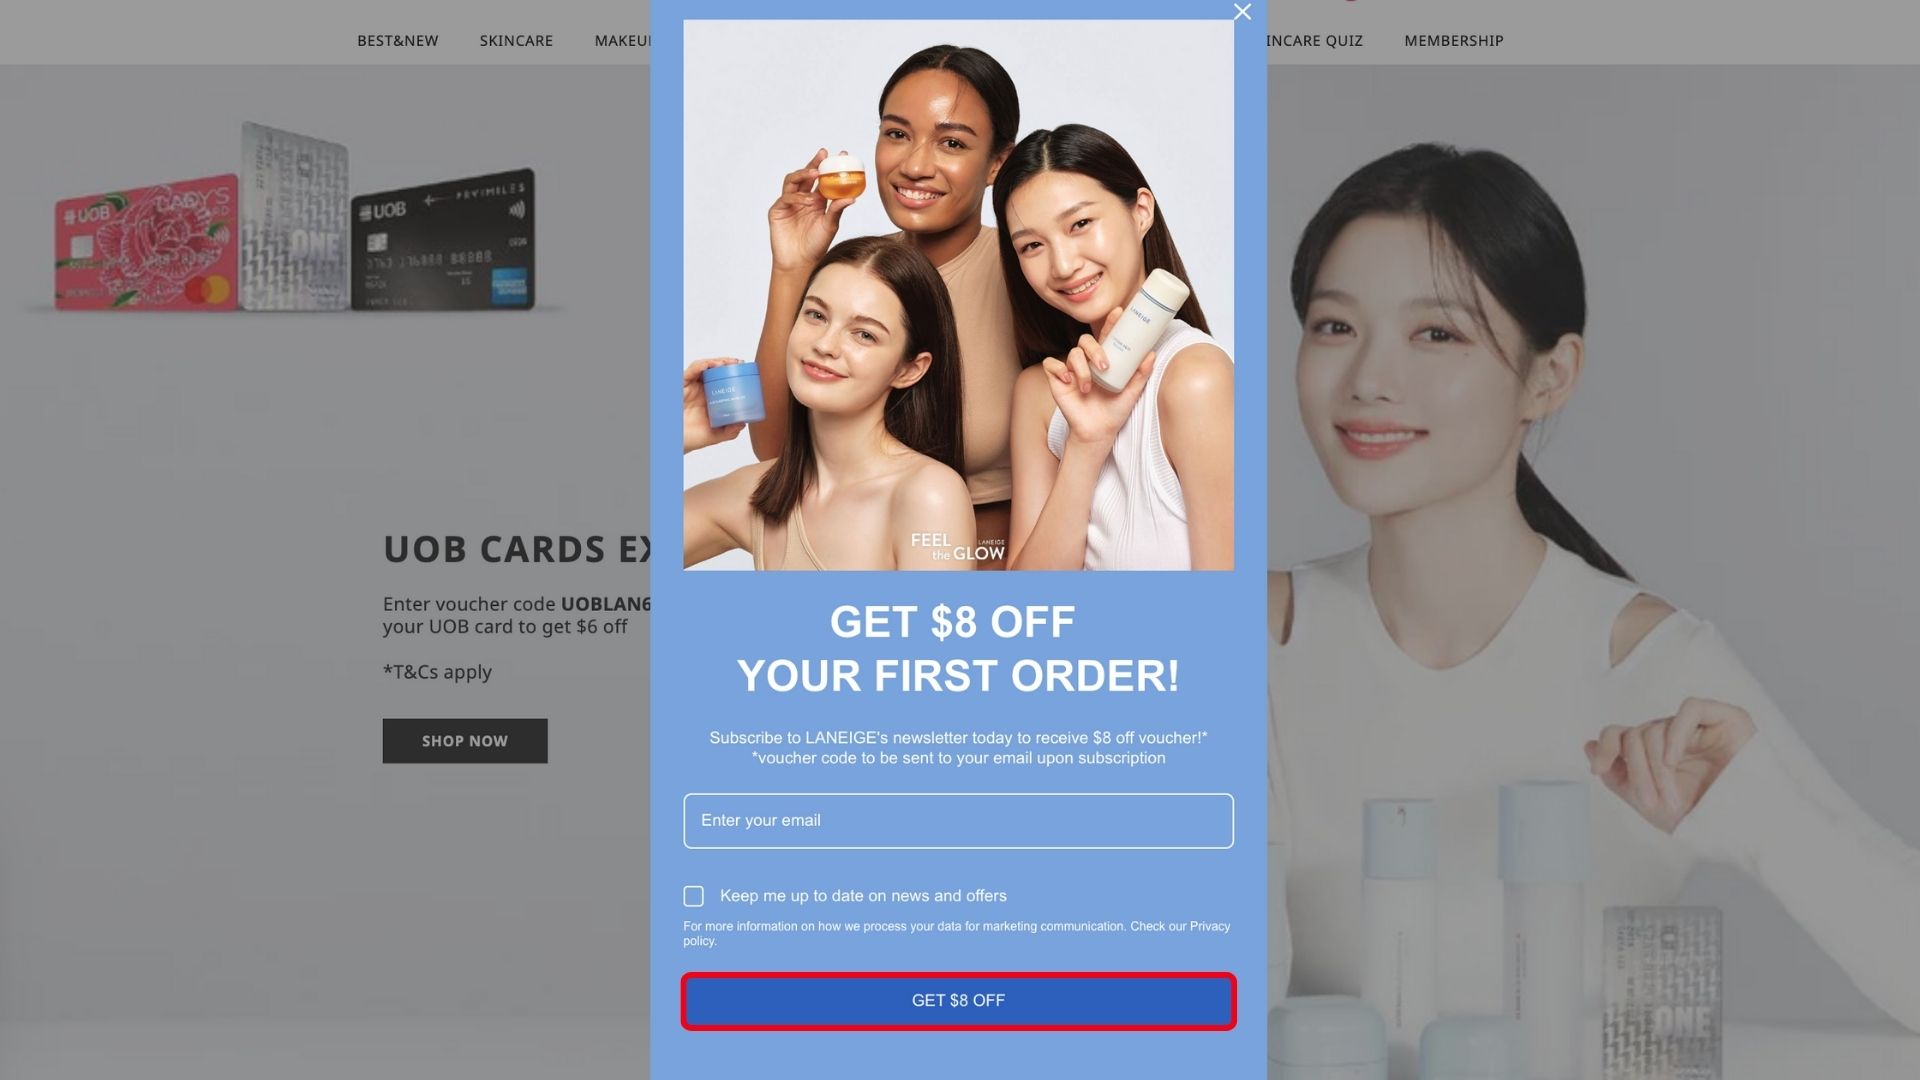 Clear and personalized CTA on Laneige.com